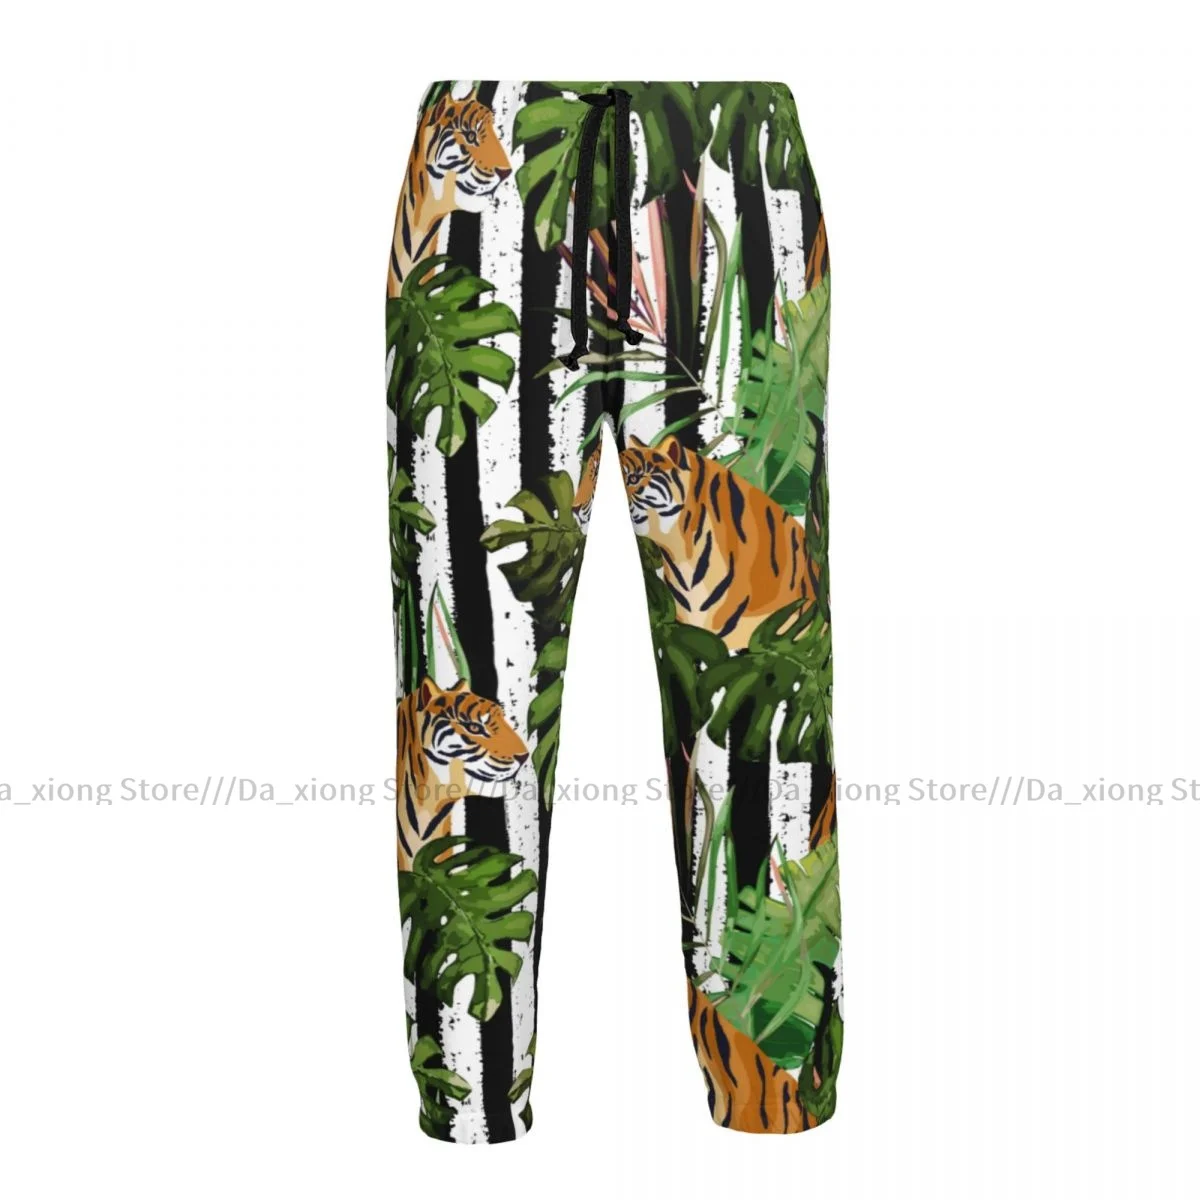 

Casual Jogger Pants Forest Tigers Men Fitness Gyms Pants Outdoor Sweatpants Pants Mens Trousers